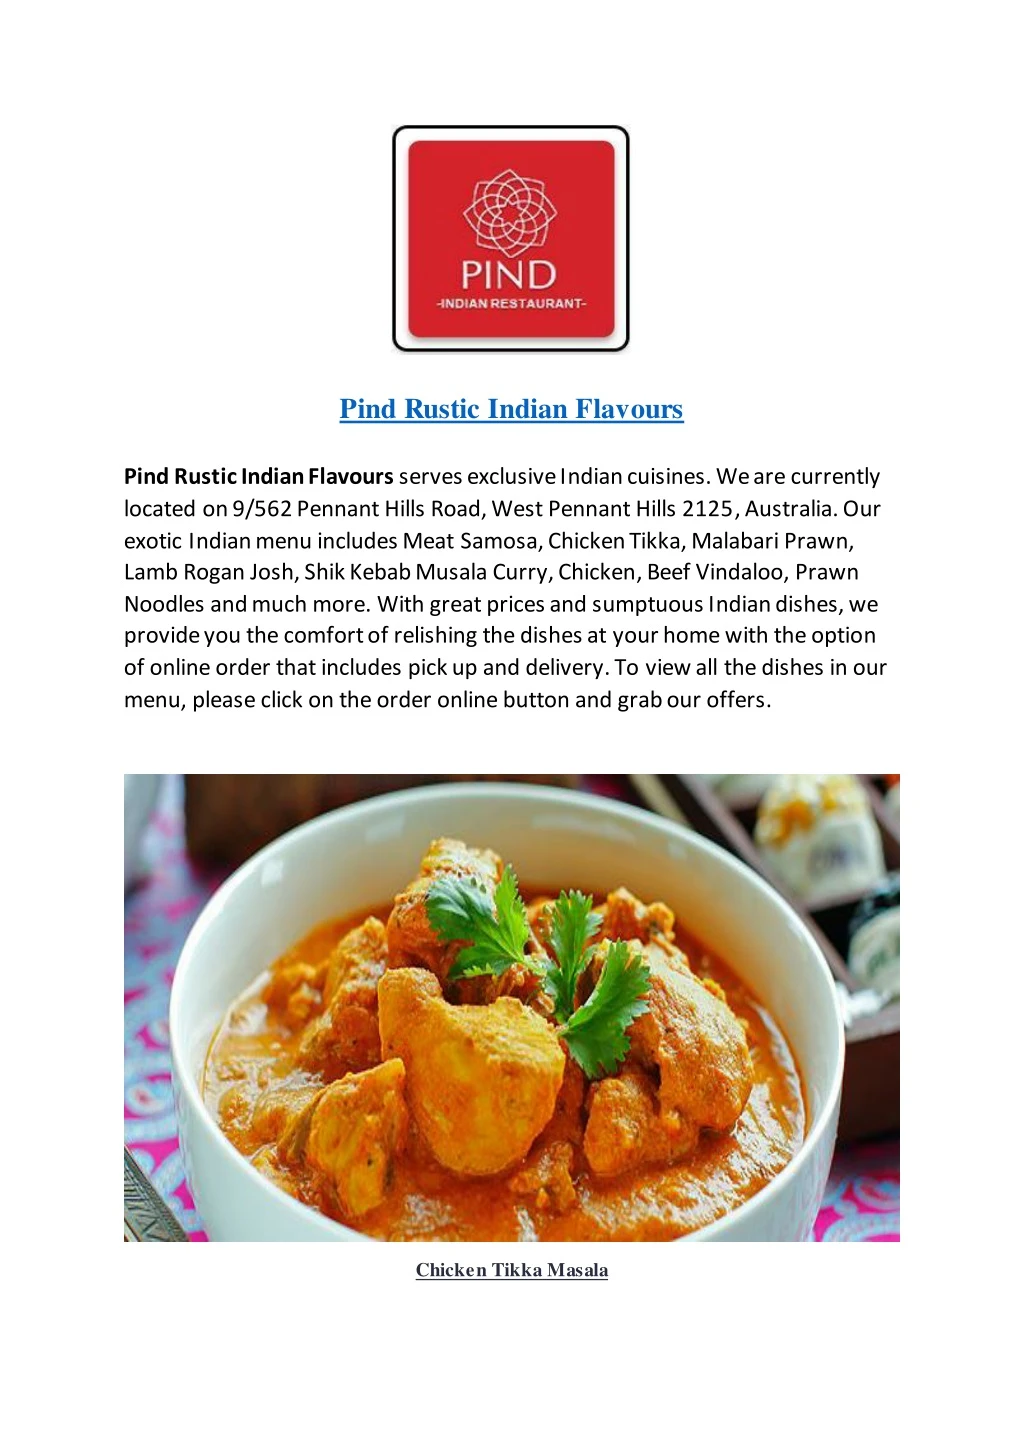 pind rustic indian flavours